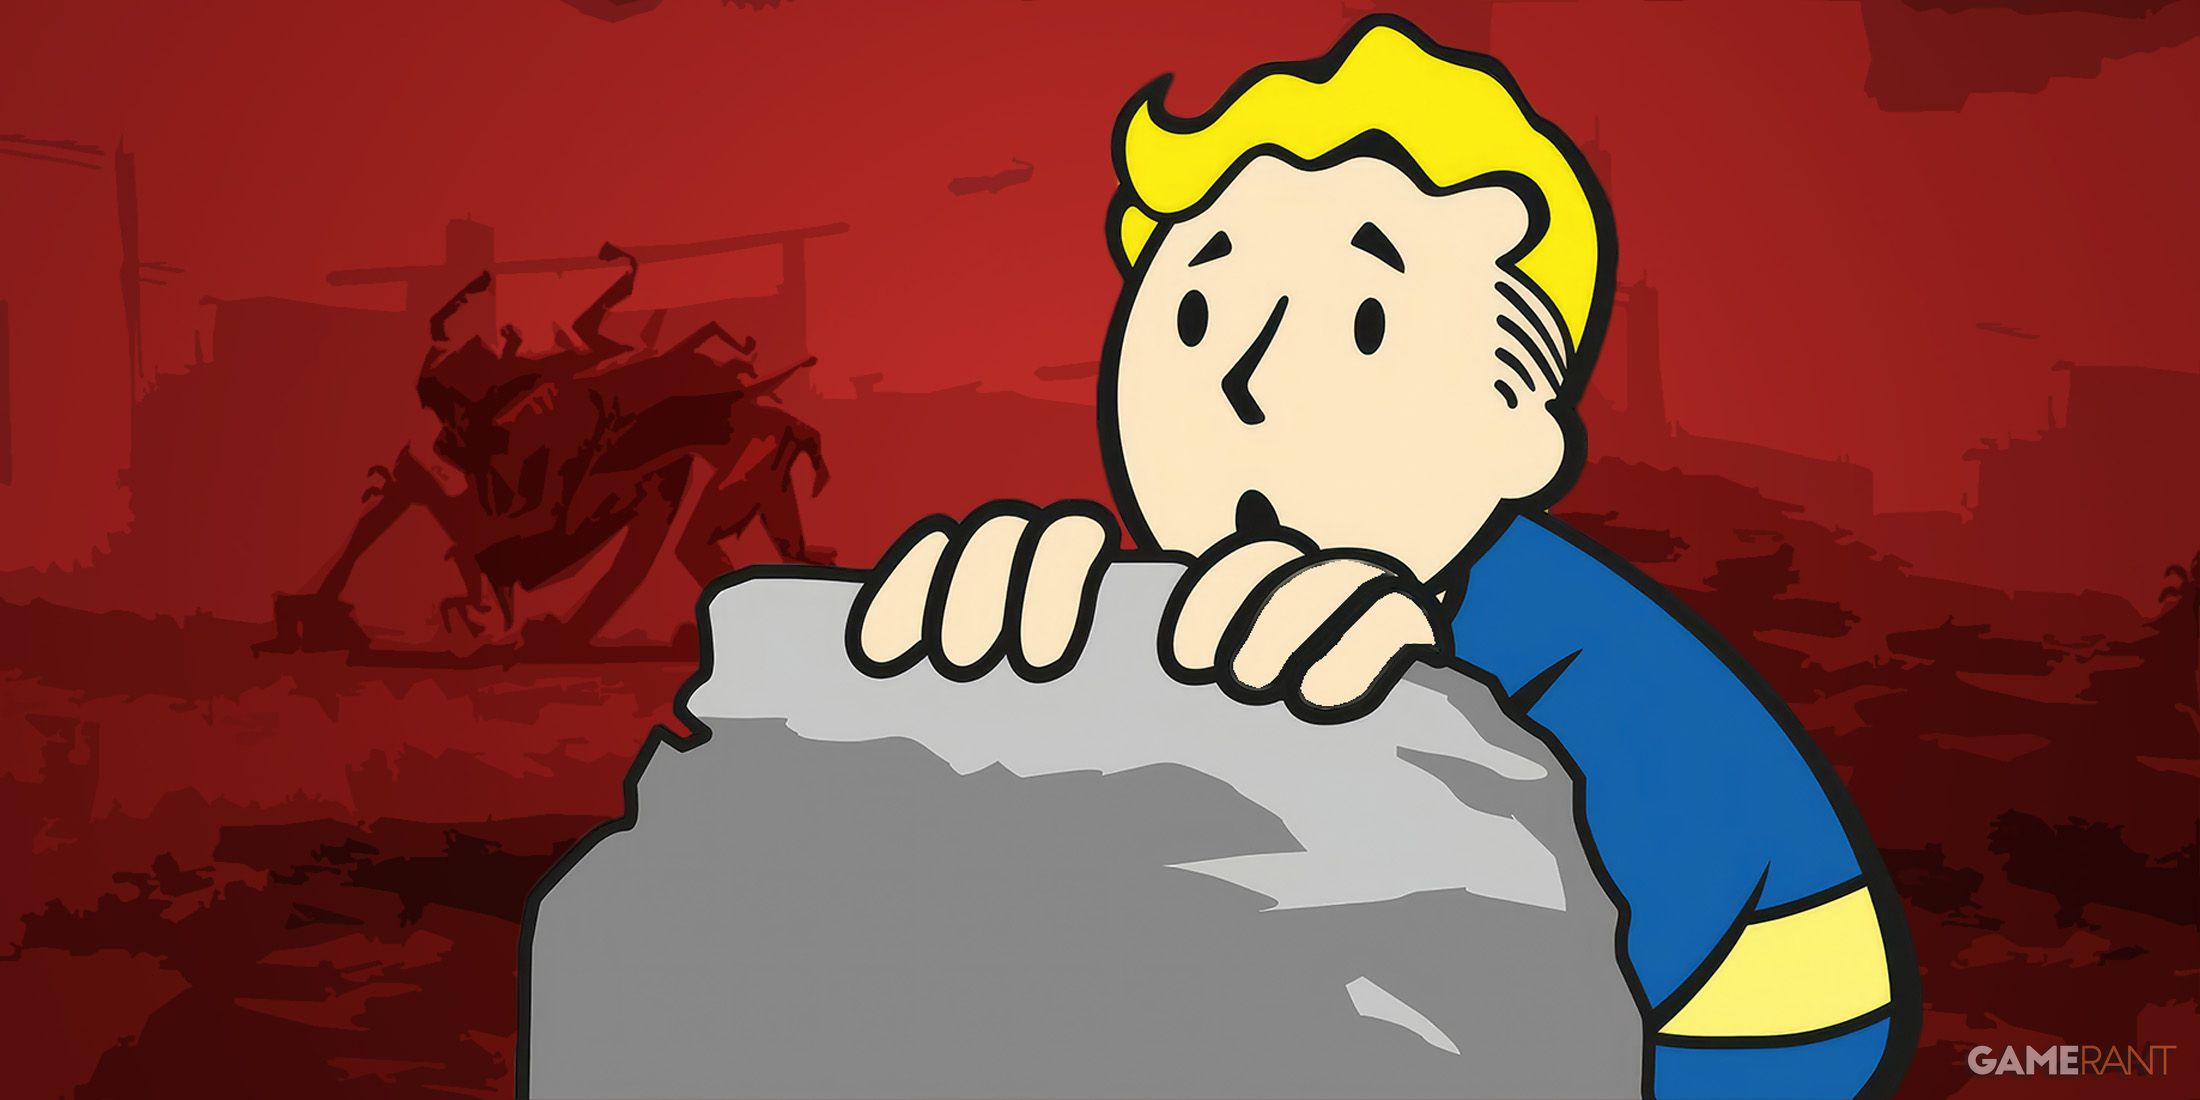 Fallout 4 Vault Boy ducking behind big rock looking at posterized red Centaur silhouette